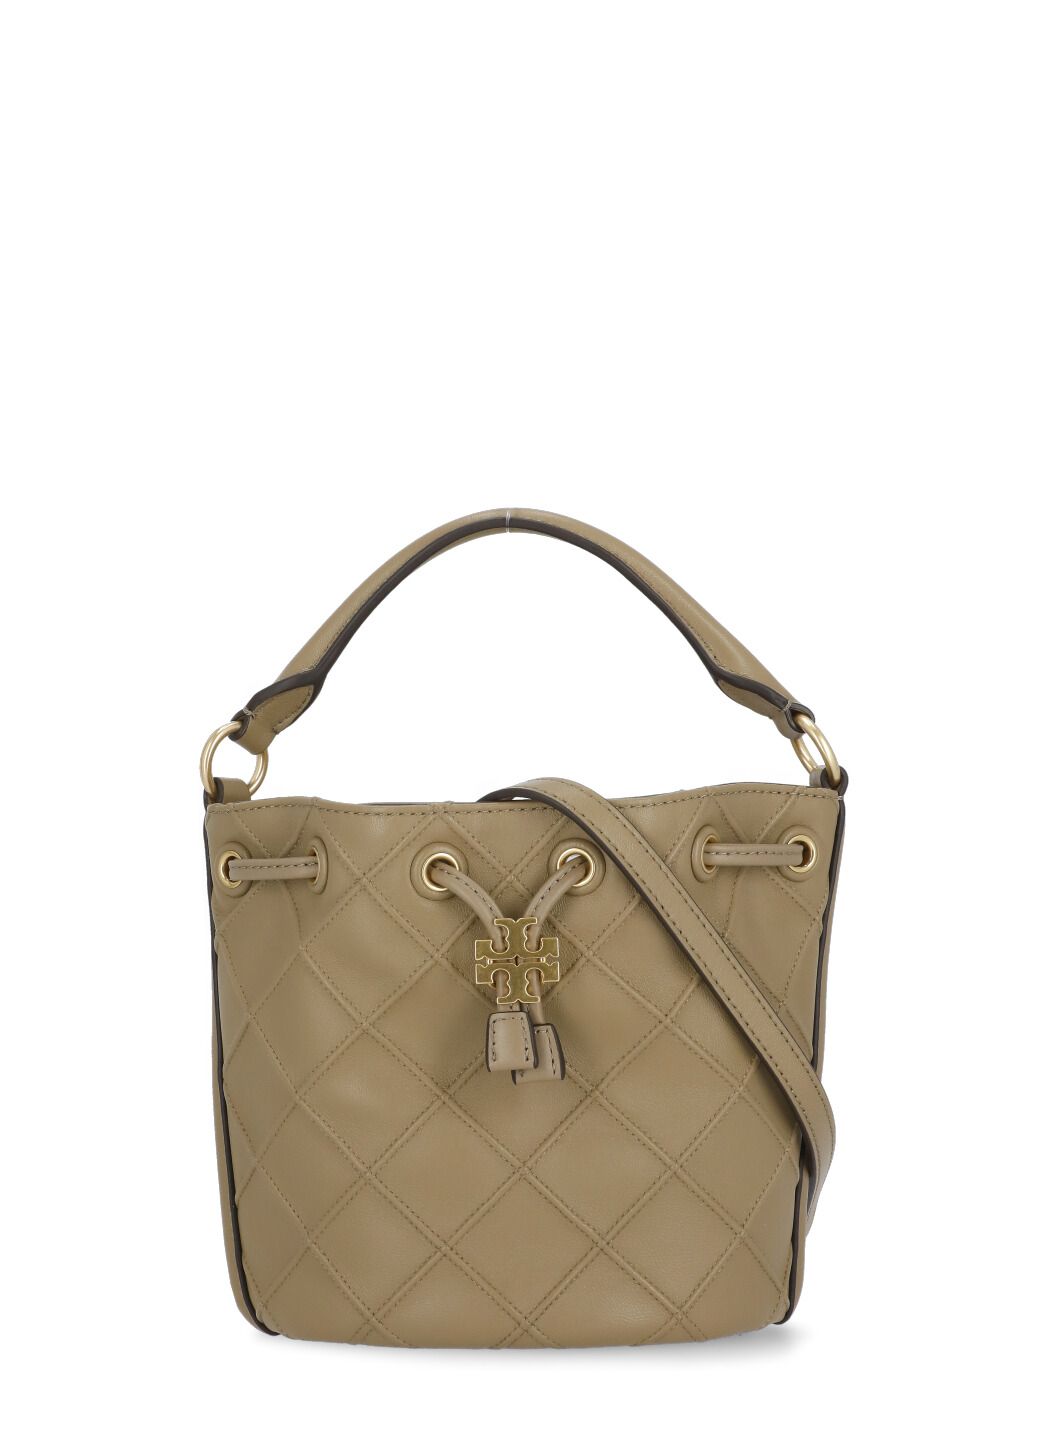 Tory Burch - The new Fleming Bucket. The softest leather with